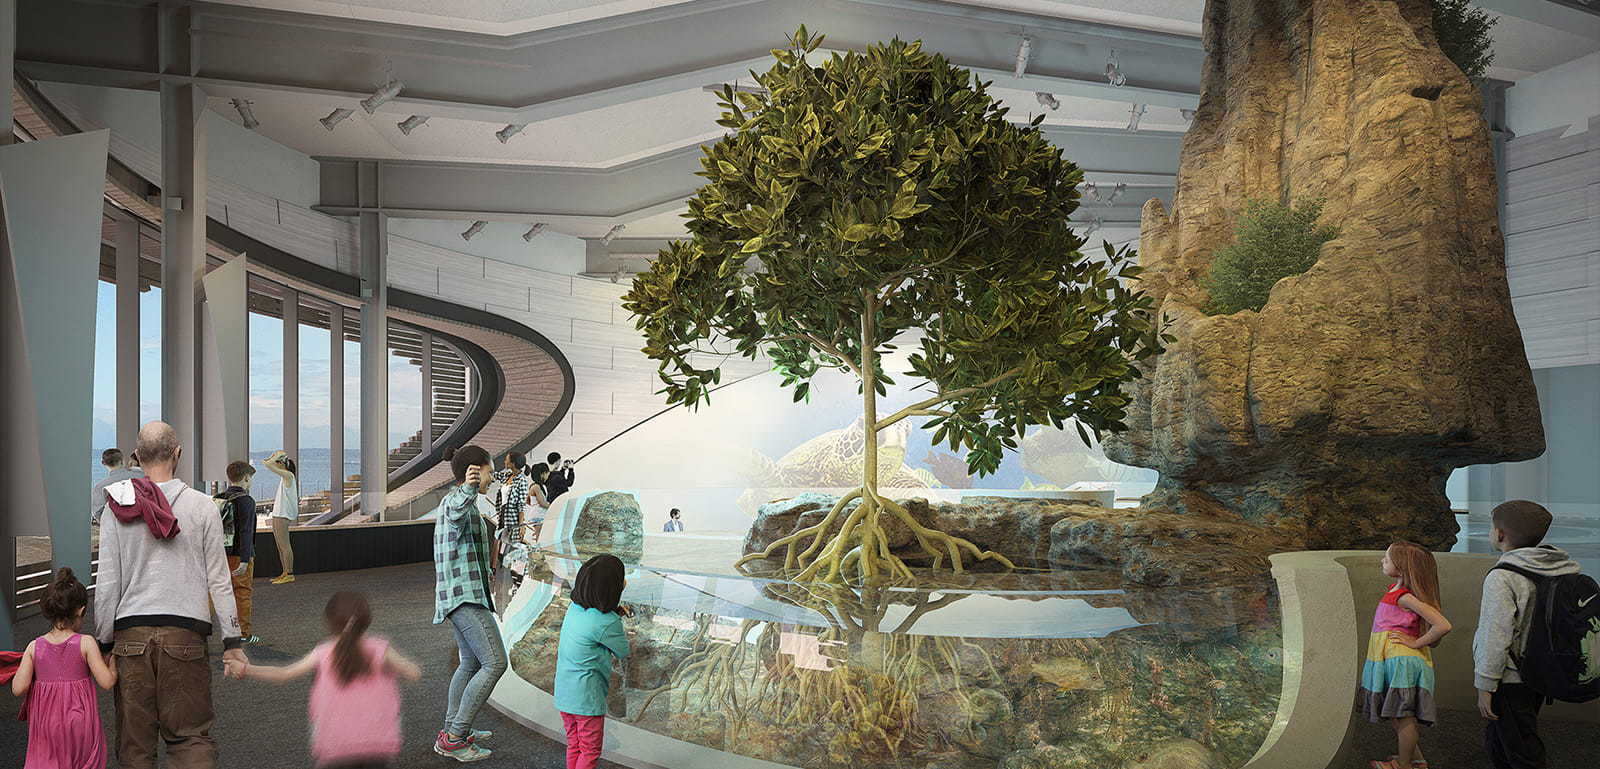 A rendering of the future Archipelago exhibit at Ocean Pavilion. The exhibit consists of a tall, rocky structure and a large mangrove tree creating a habitat for fish.